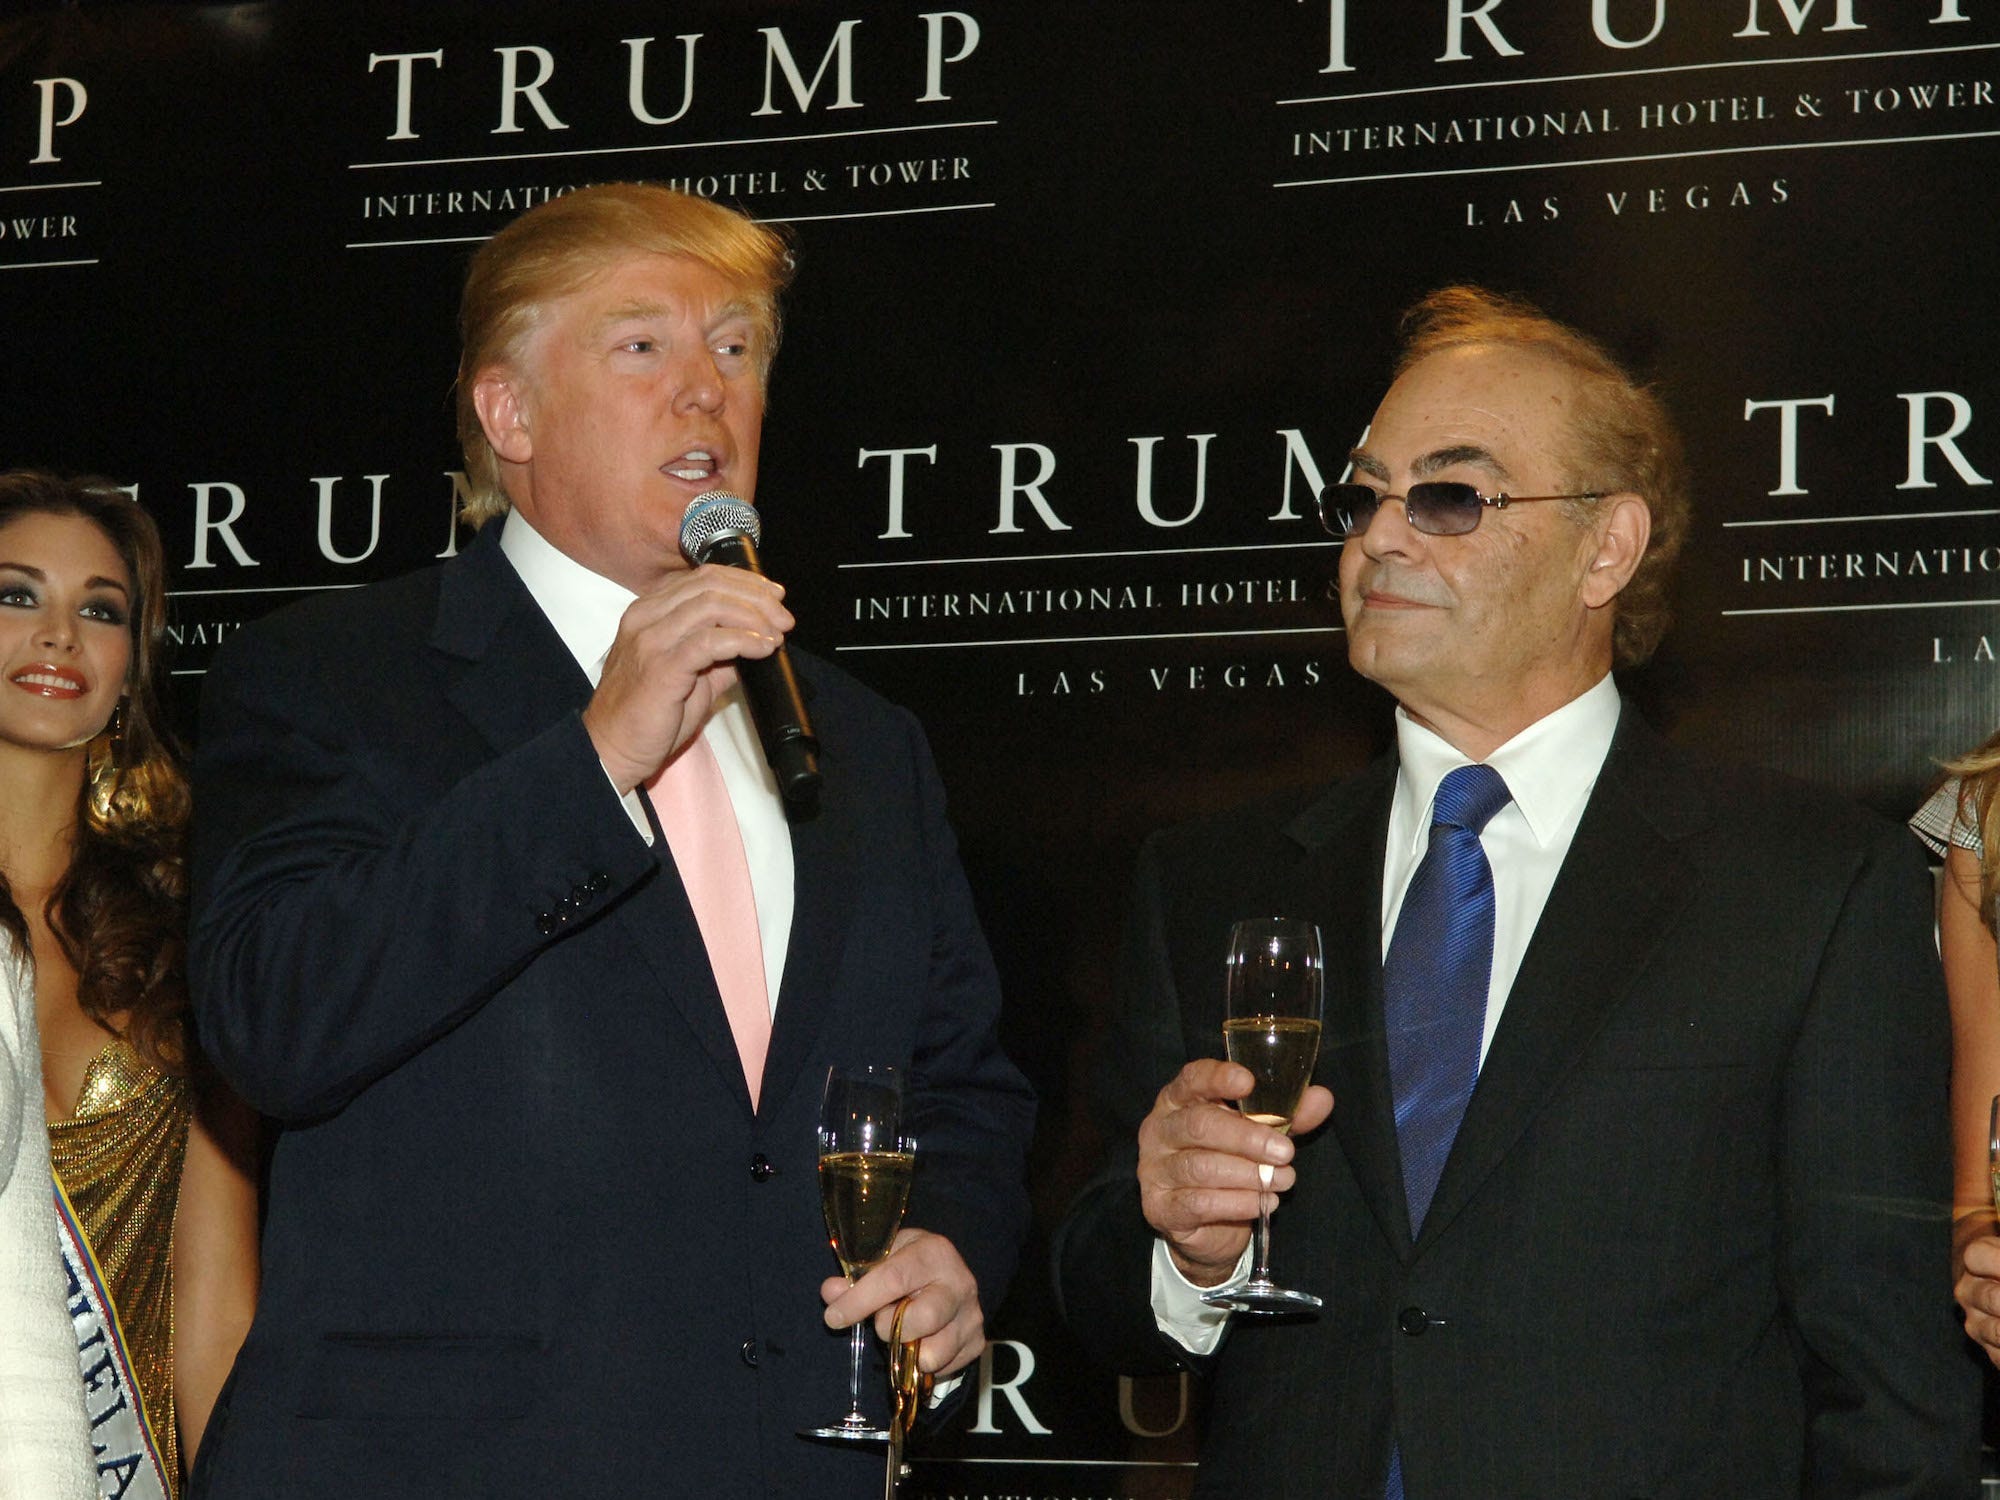 <p>Phil Ruffin, a casino magnate, has contributed $2 million to Trump's MAGA Inc. super PAC and $814,600 to the Trump 47 Committee.</p><p>Ruffin is a long-time associate and business partner of Trump's — he co-owns the Trump International Hotel in Las Vegas alongside the Trump Organization.</p><p>Ruffin also accompanied Trump to Moscow in 2013 for the Miss Universe Pageant. </p><p>That trip figured prominently in the largely unverified Steele Dossier, which alleged that the Russians may have blackmailed Trump by filming him being urinated on by Russian prostitutes.</p>